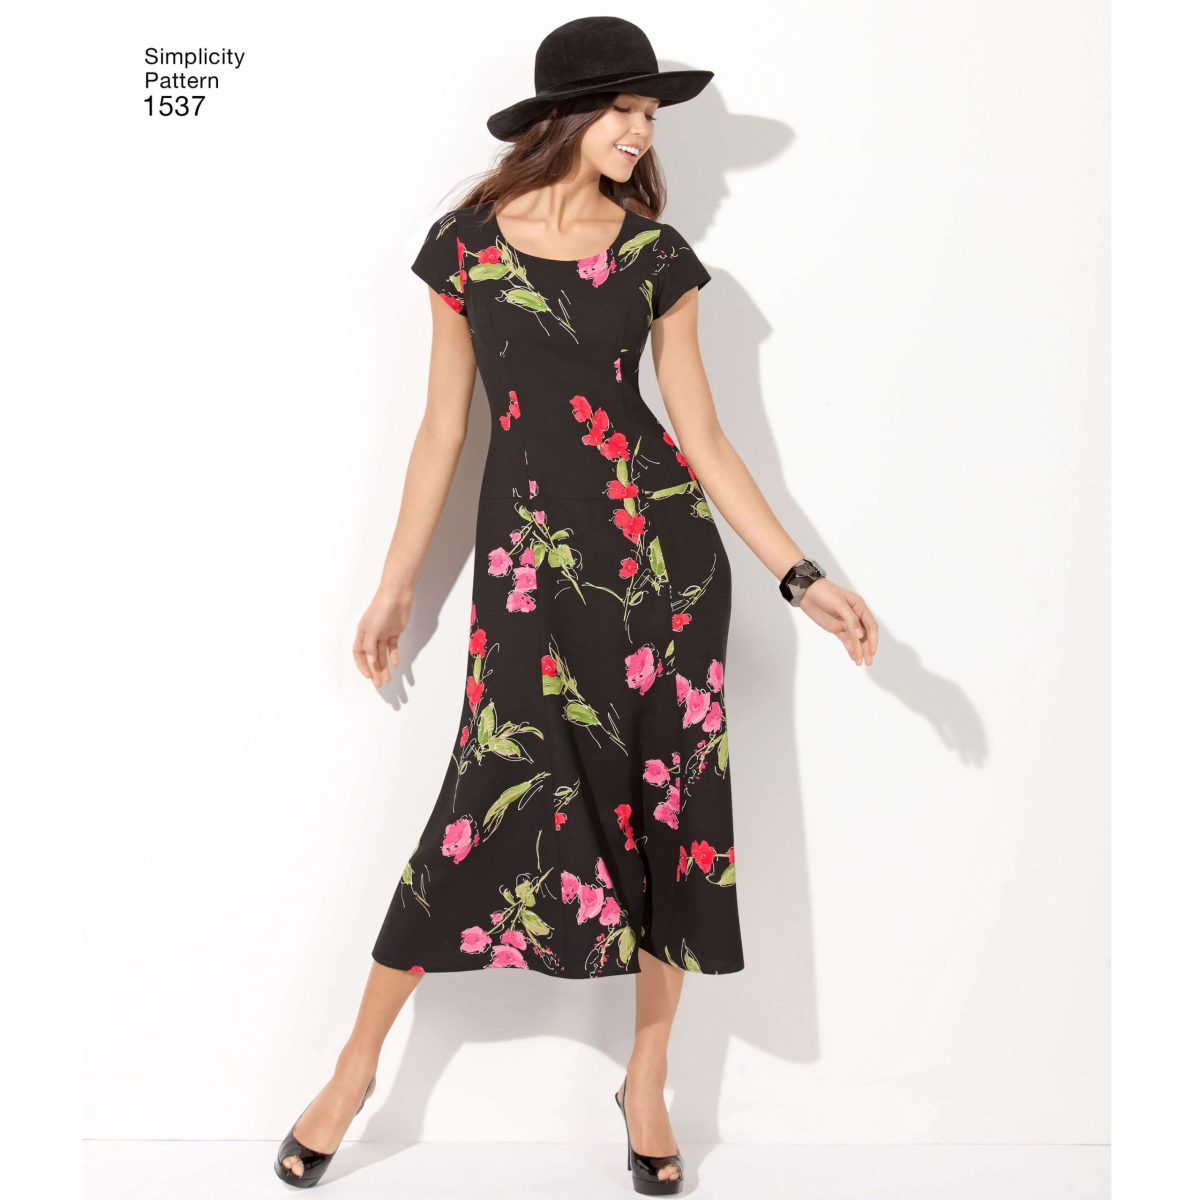 Simplicity Sewing Pattern 1537 Misses' and Plus Size Amazing Fit Dress